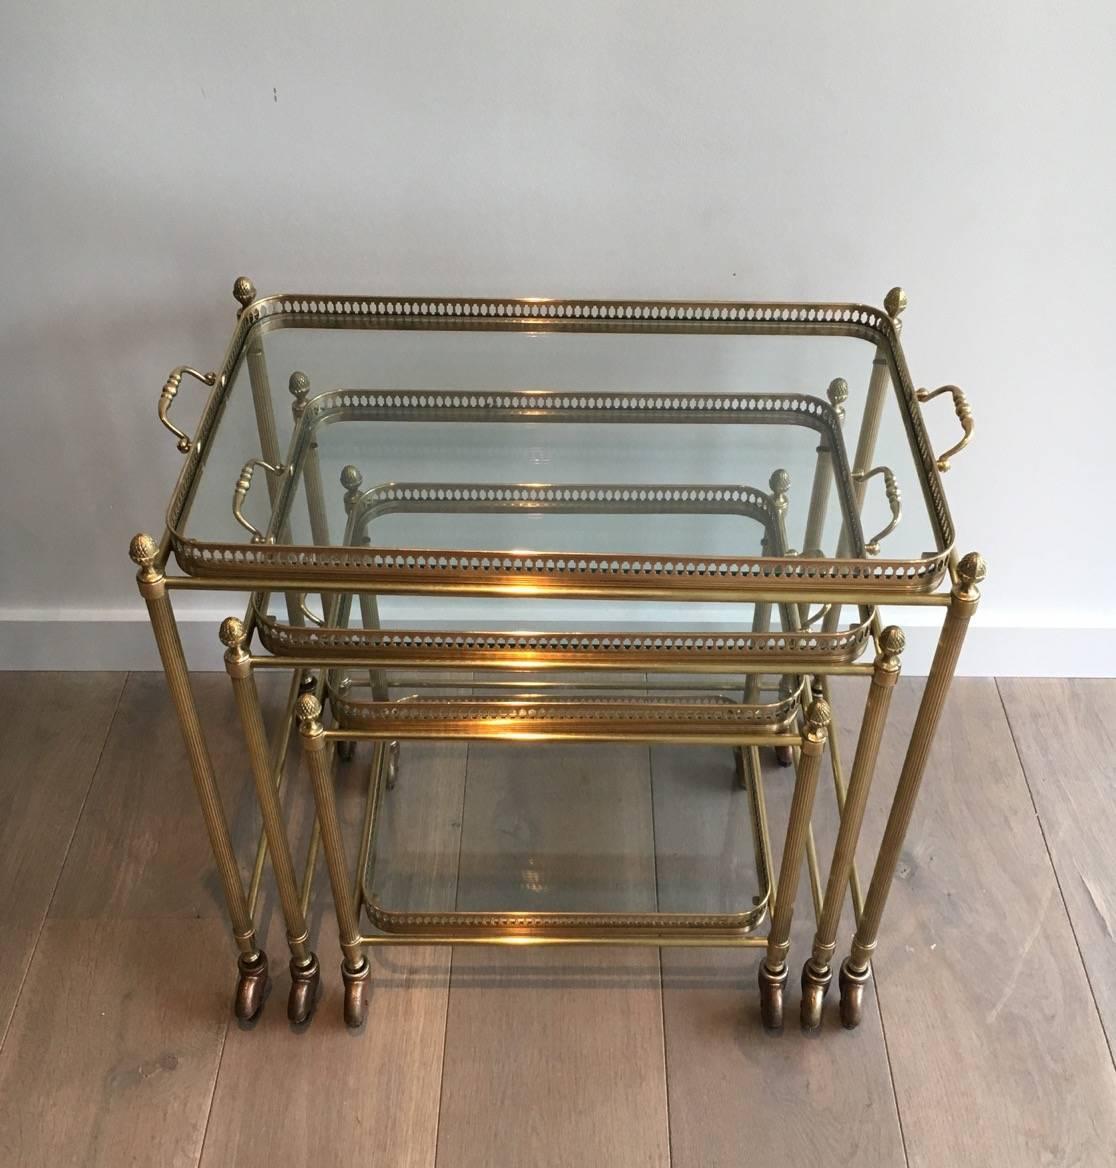 Set of three brass nesting tables on casters with four removable gallery trays. In the style of Maison Baguès. French, circa 1940s.

Here are measurements of each nesting tables:

UPPER: 25.25